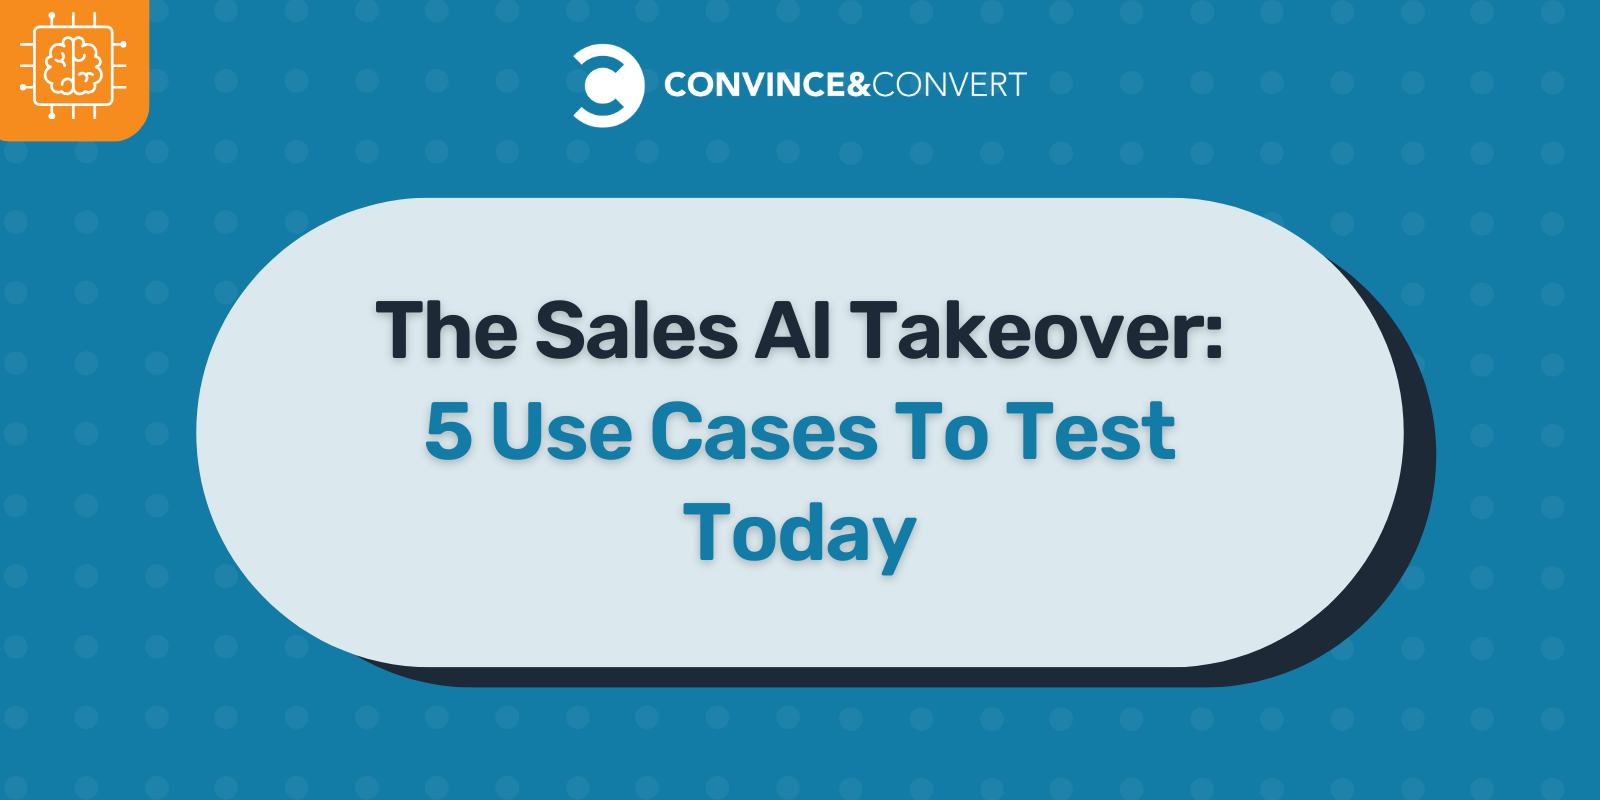 The Sales AI Takeover 5 Use Cases To Test Today CTA